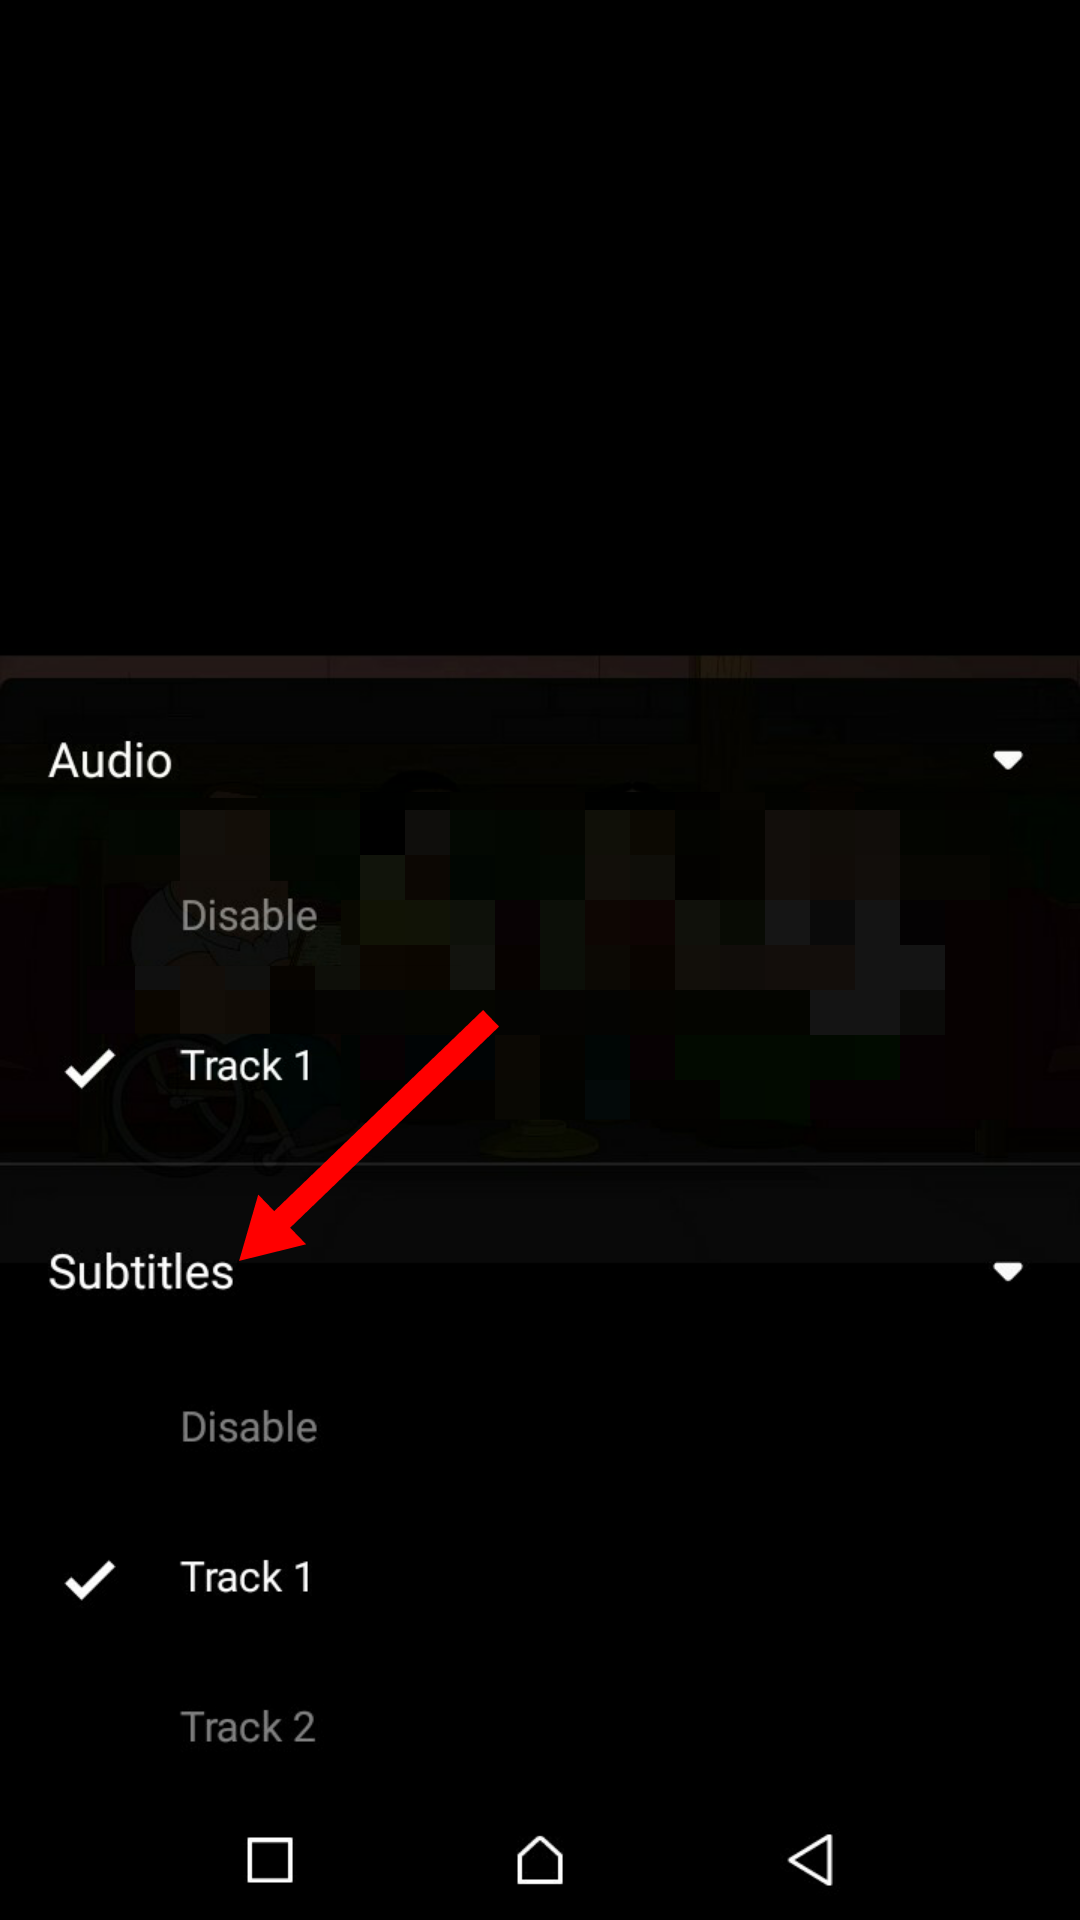 instal the new for android Subtitle Edit 4.0.1